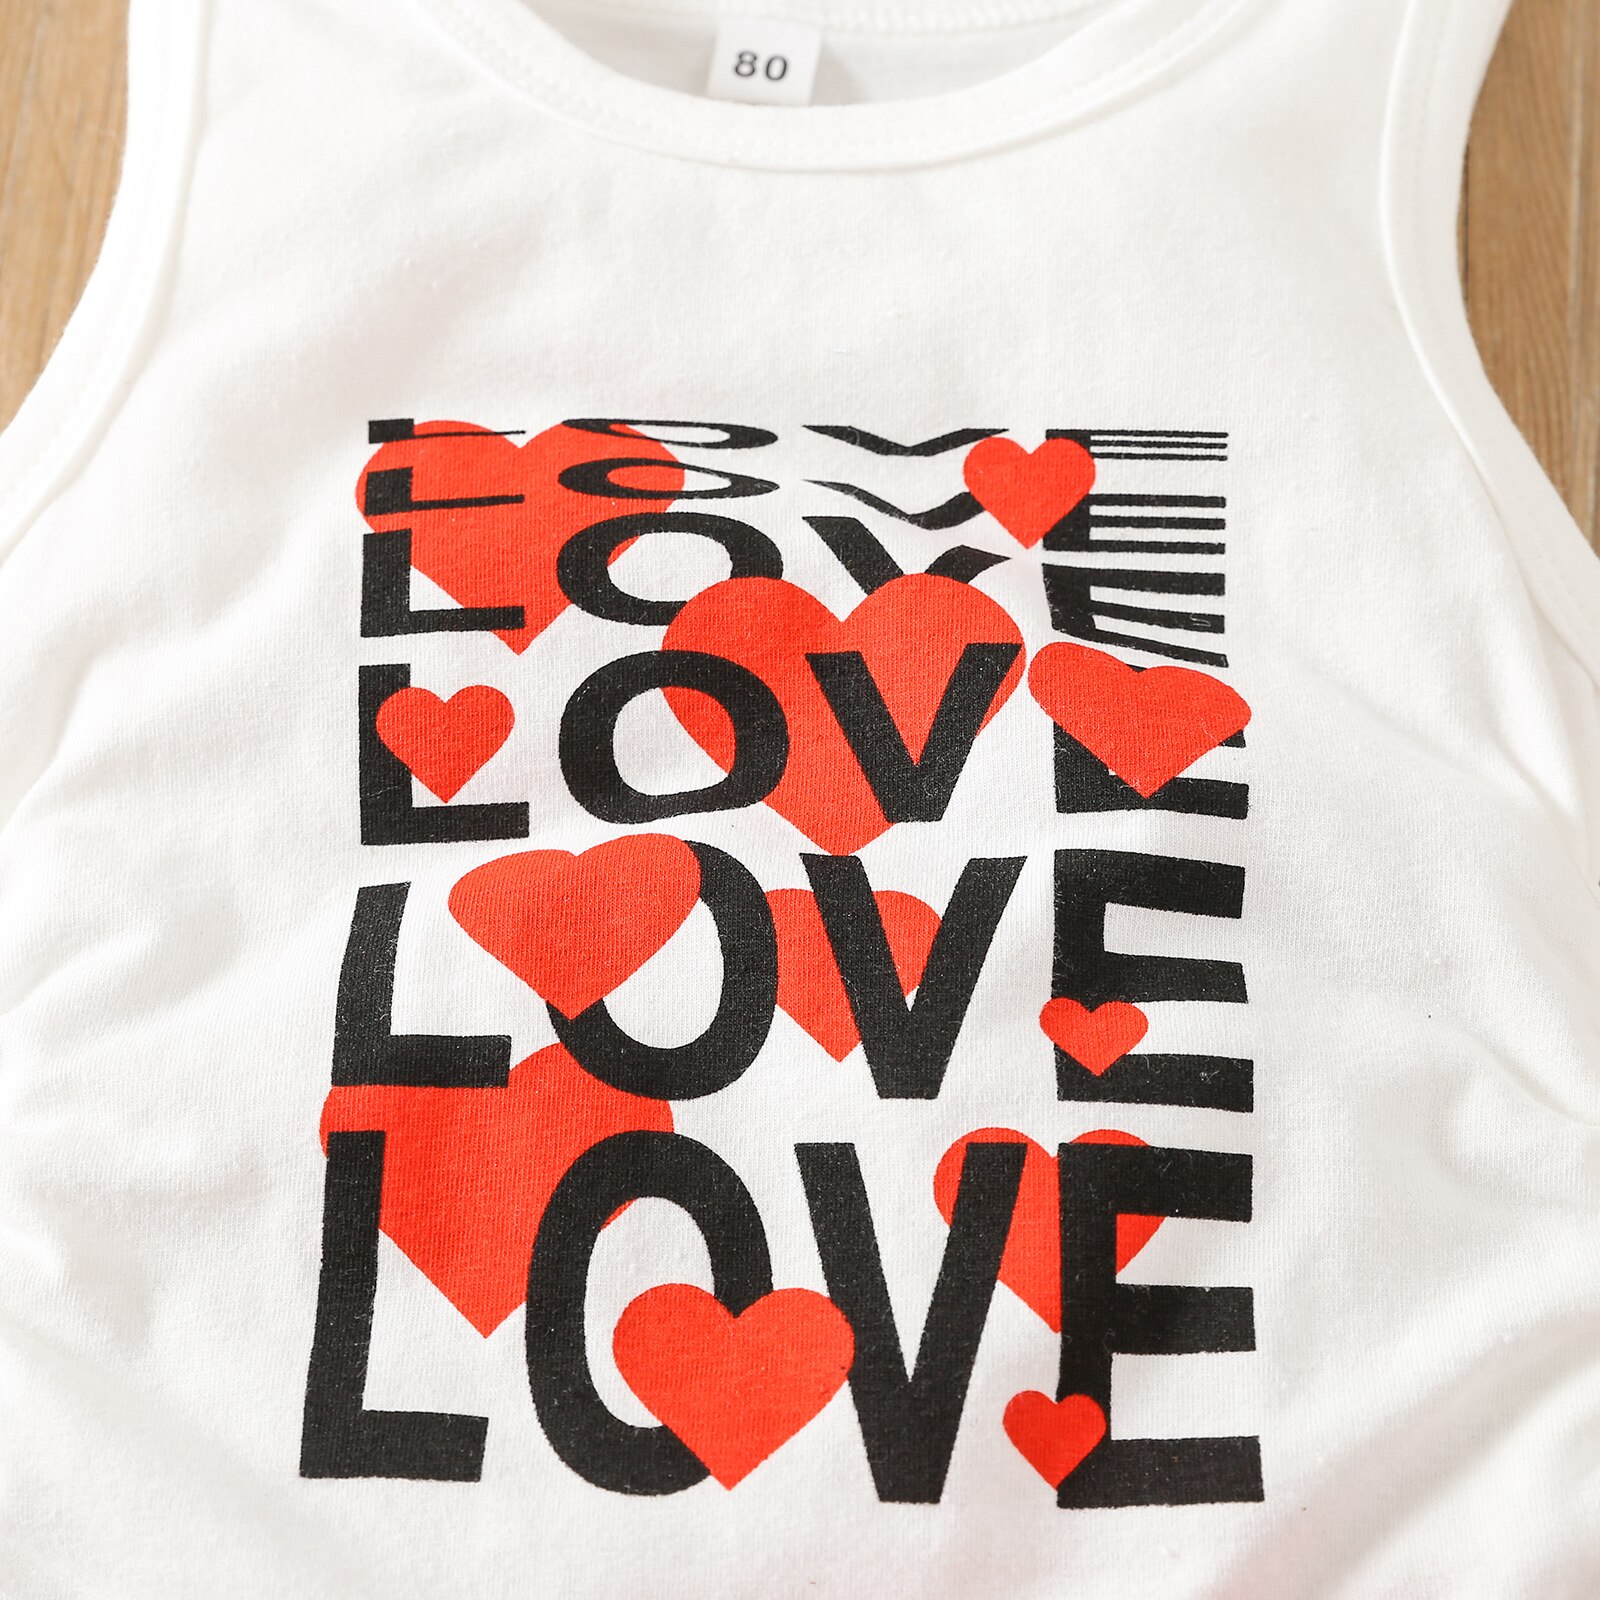 Baby-Toddler-Girls-Clothes-Set-Love-heart-Pattern-Letter-Printed-Sleeveless-Tank-Tops-Solid-Color-Shorts-2